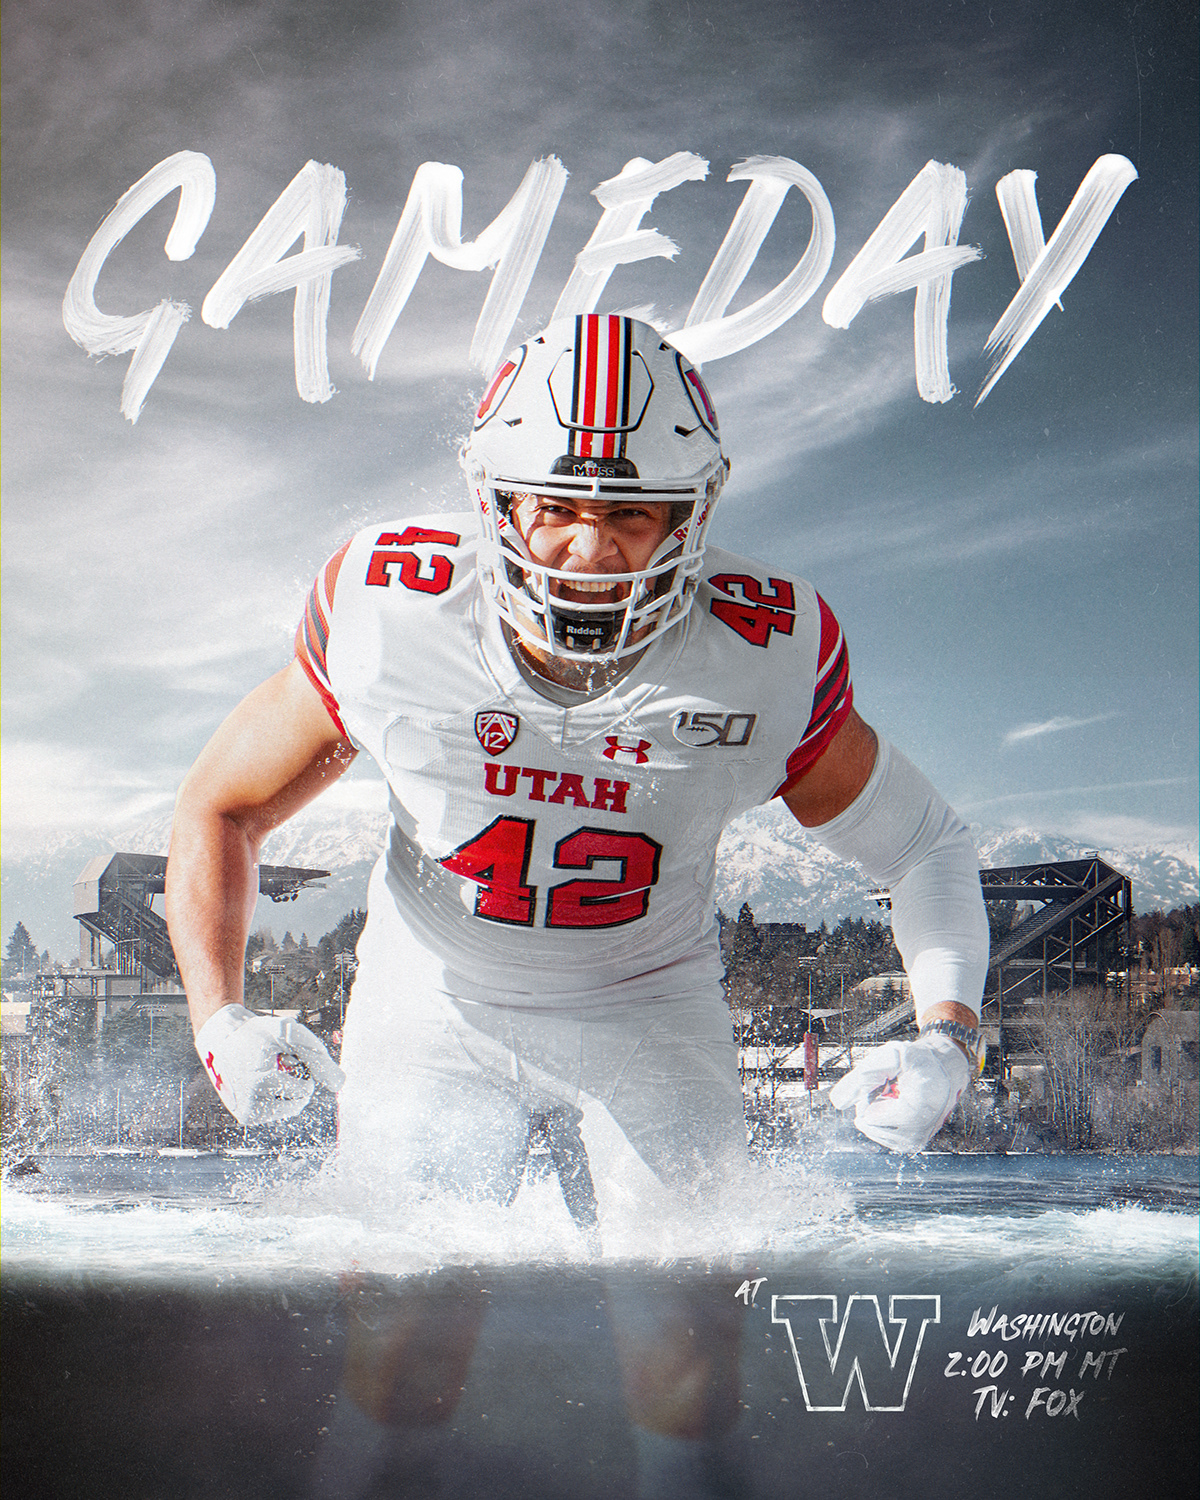 2019 Game Day Graphics on Behance